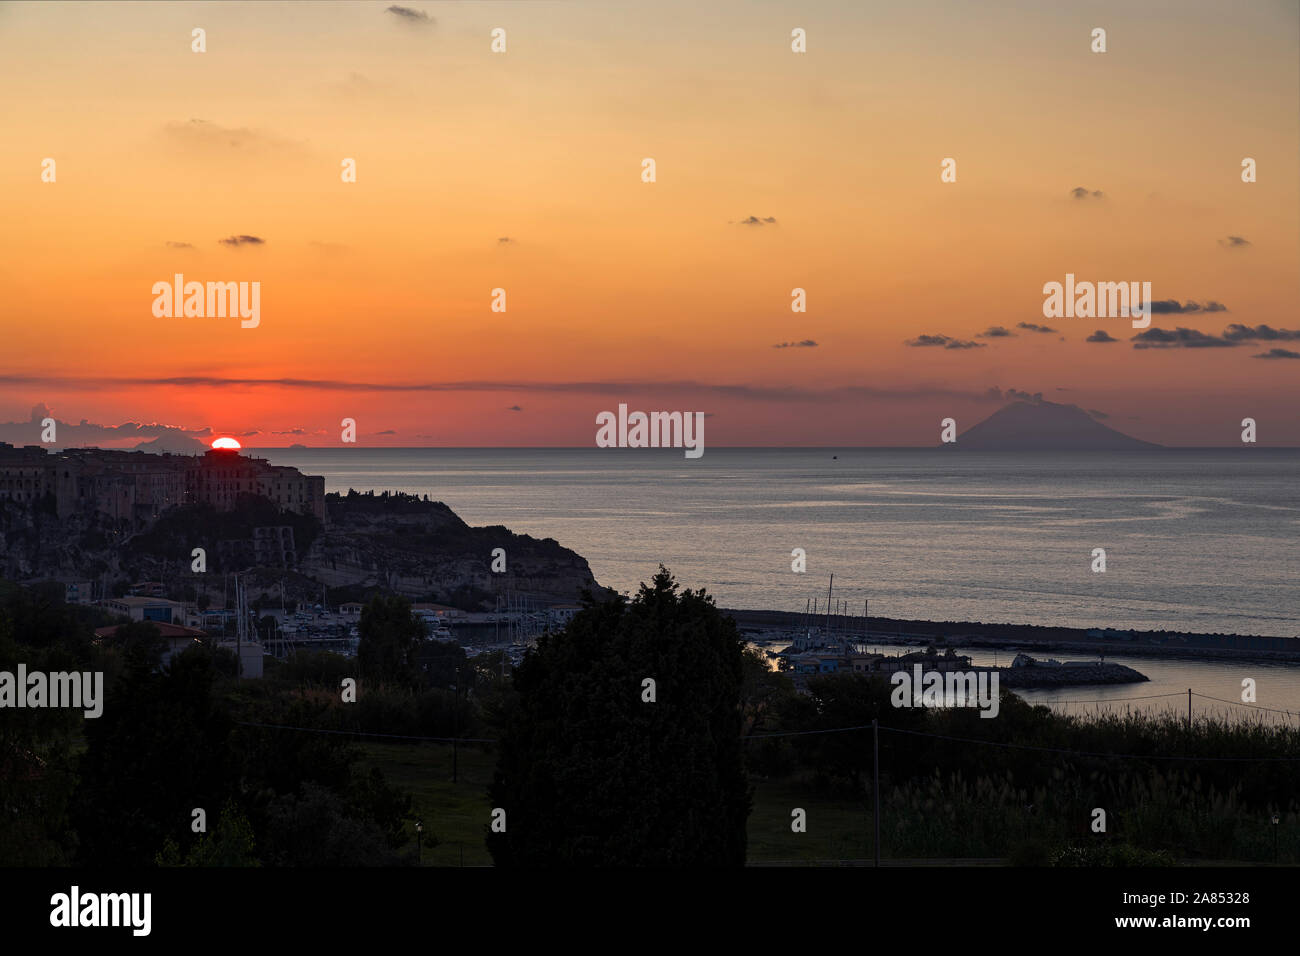 third in sequence of five images of sunset over ocean at tropea italy Stock Photo